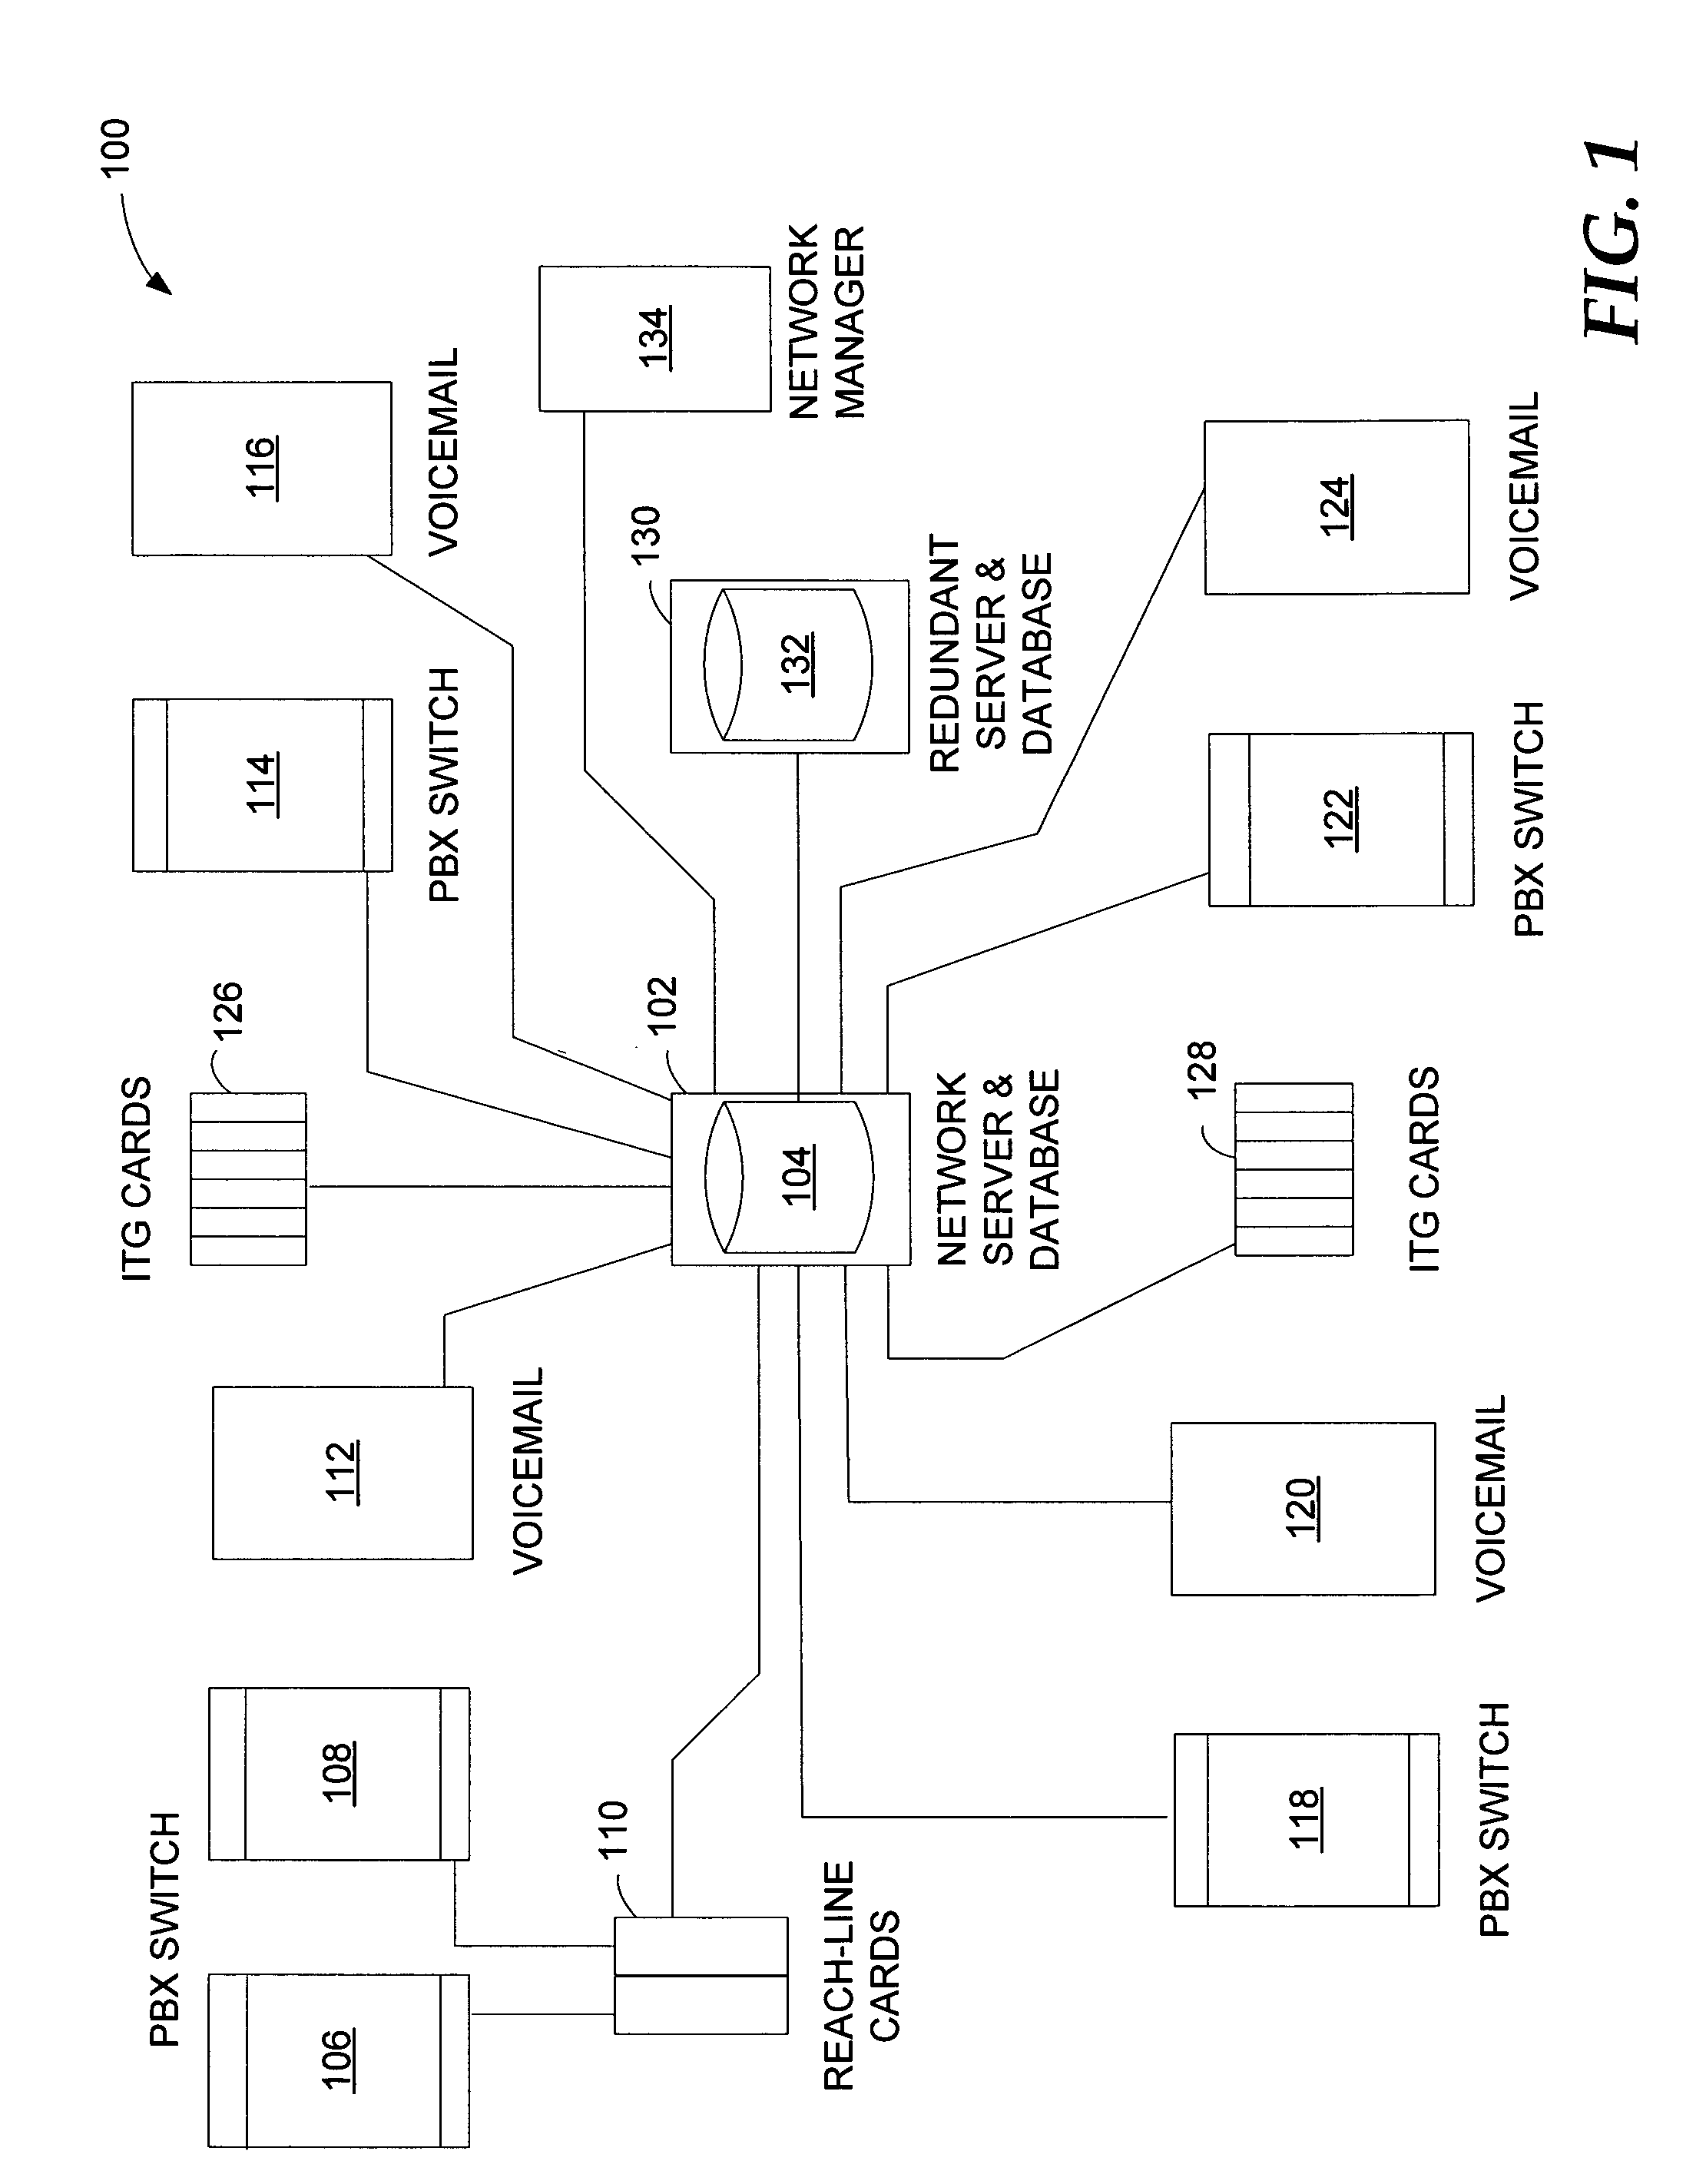 Method and system for backing up or restoring data in remote devices over a communications network